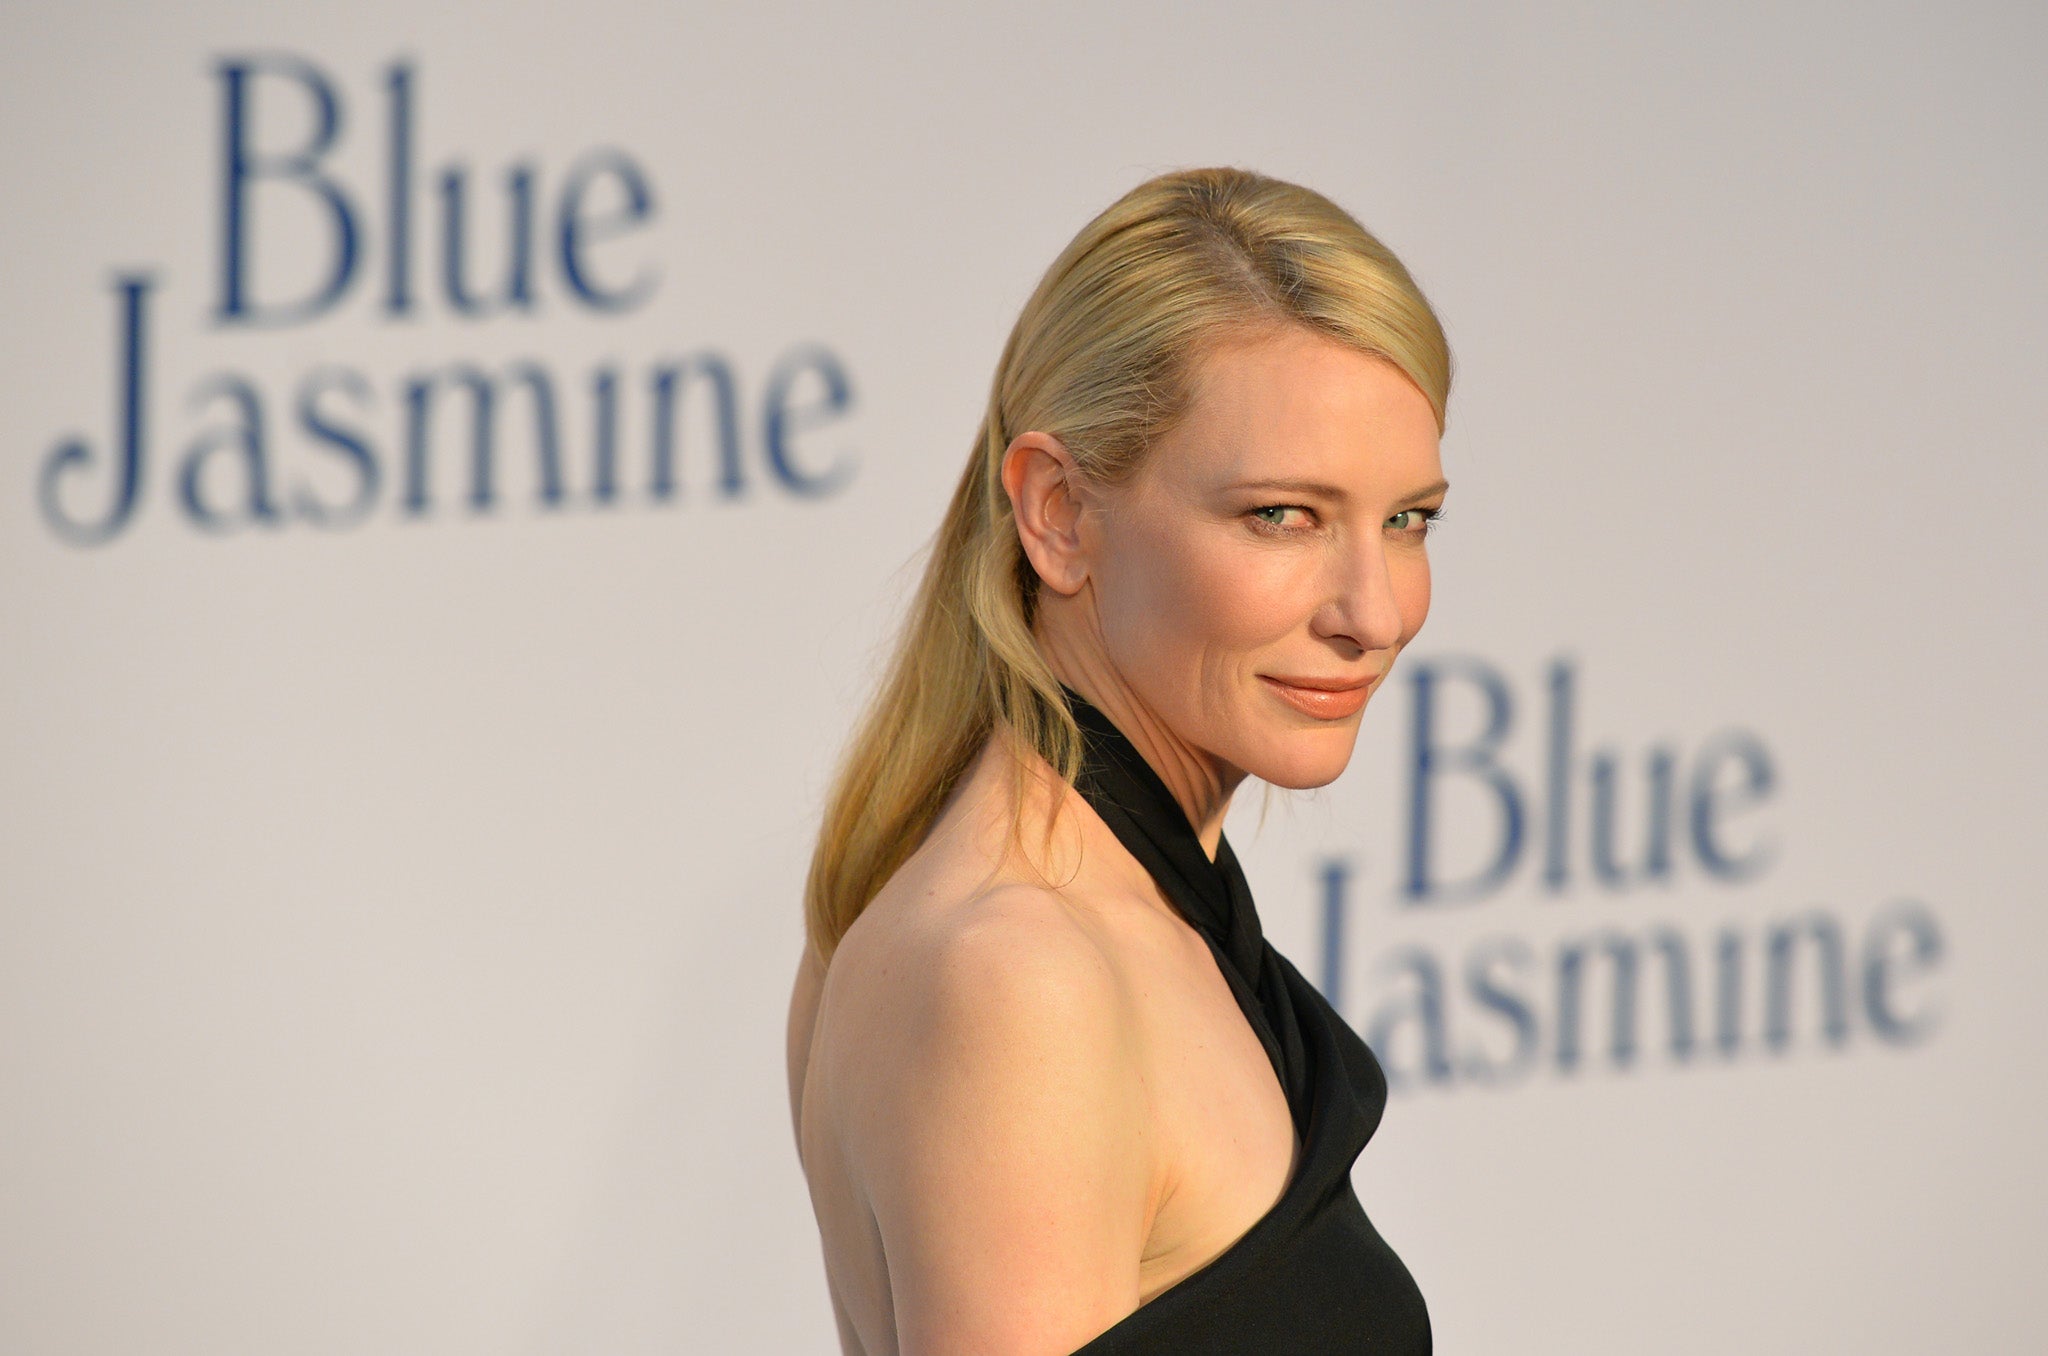 Cate Blanchett at the London premiere of Blue Jasmine